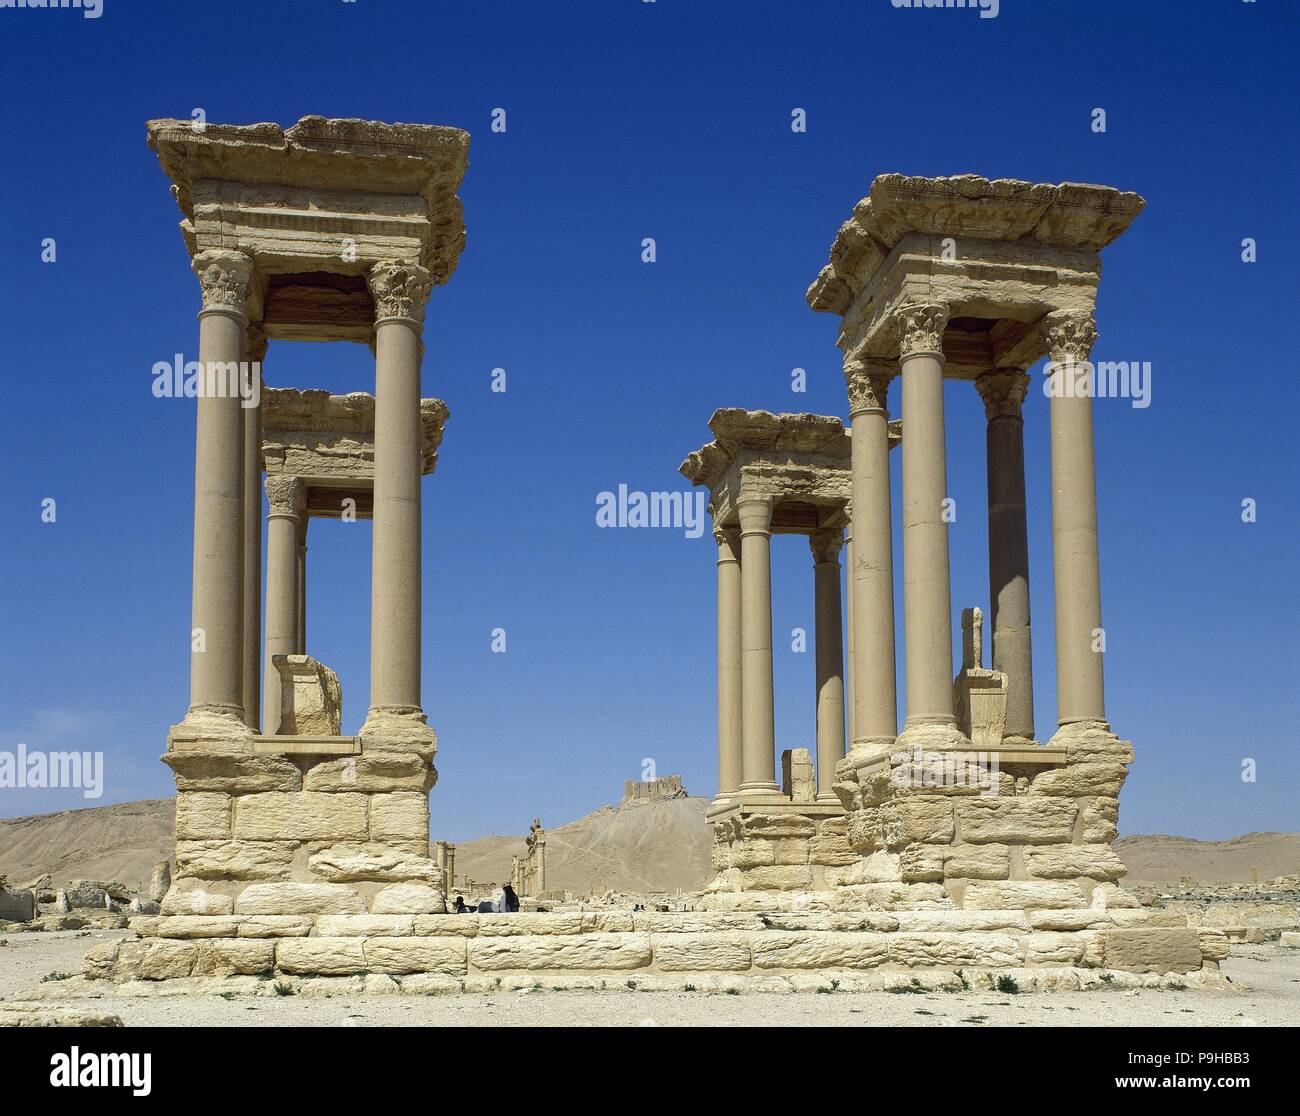 Palmyra, Syria. The Tetrapylon. Ancient type of monument of cubic shape with a gate on each of the four sides. Photo taken before Syrian Civil War. Stock Photo